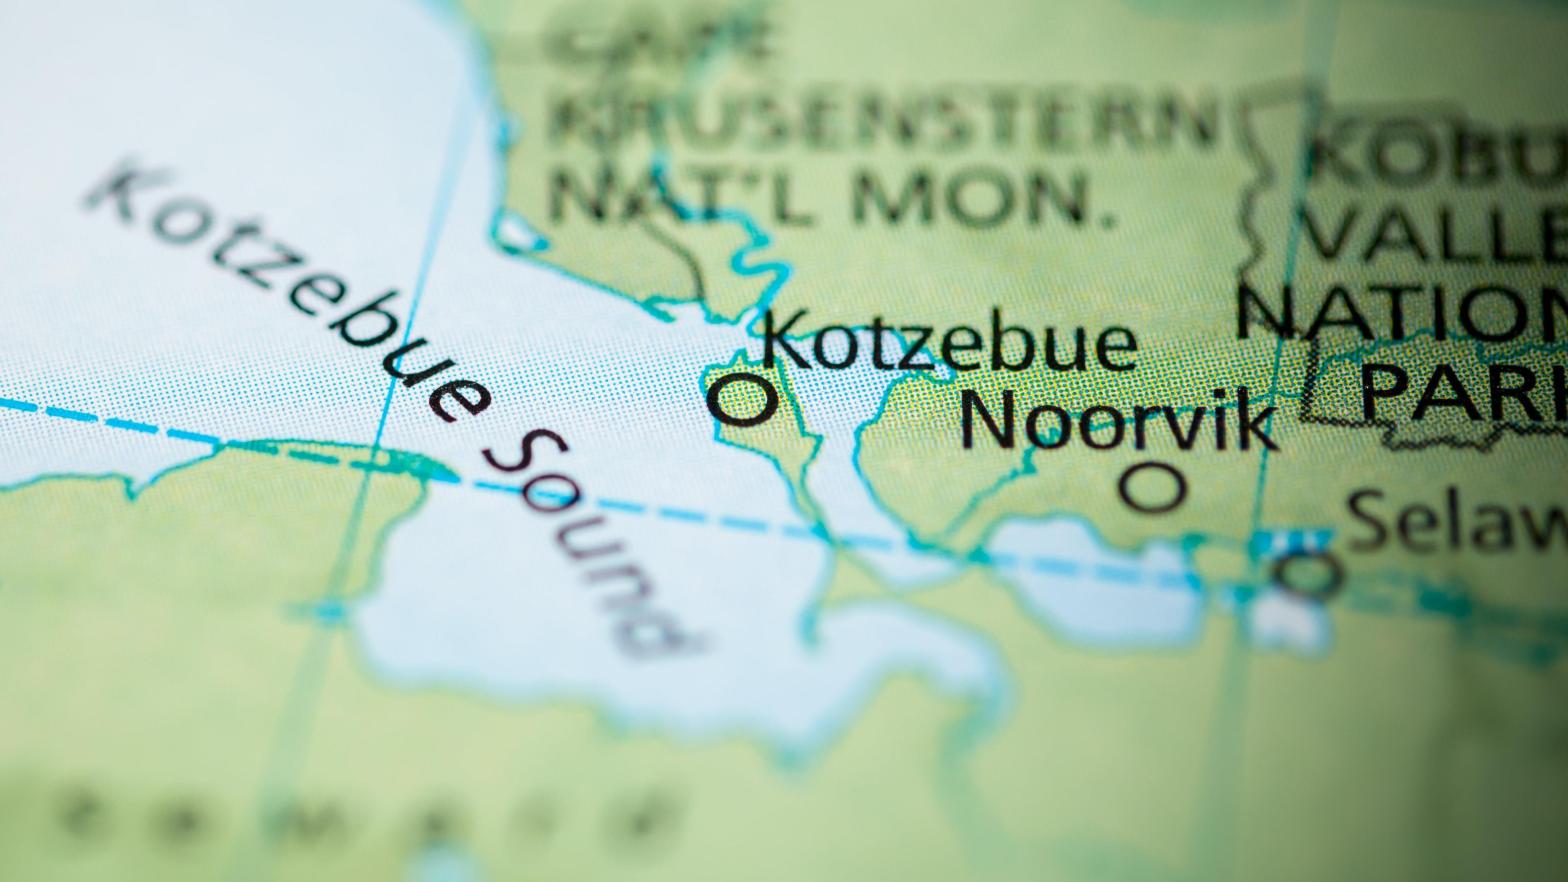 The man became stranded during his trek from Noorvik to Kotzebue, and triggered his iPhone's emergency satellite connection.  (Image: SevenMaps, Shutterstock)